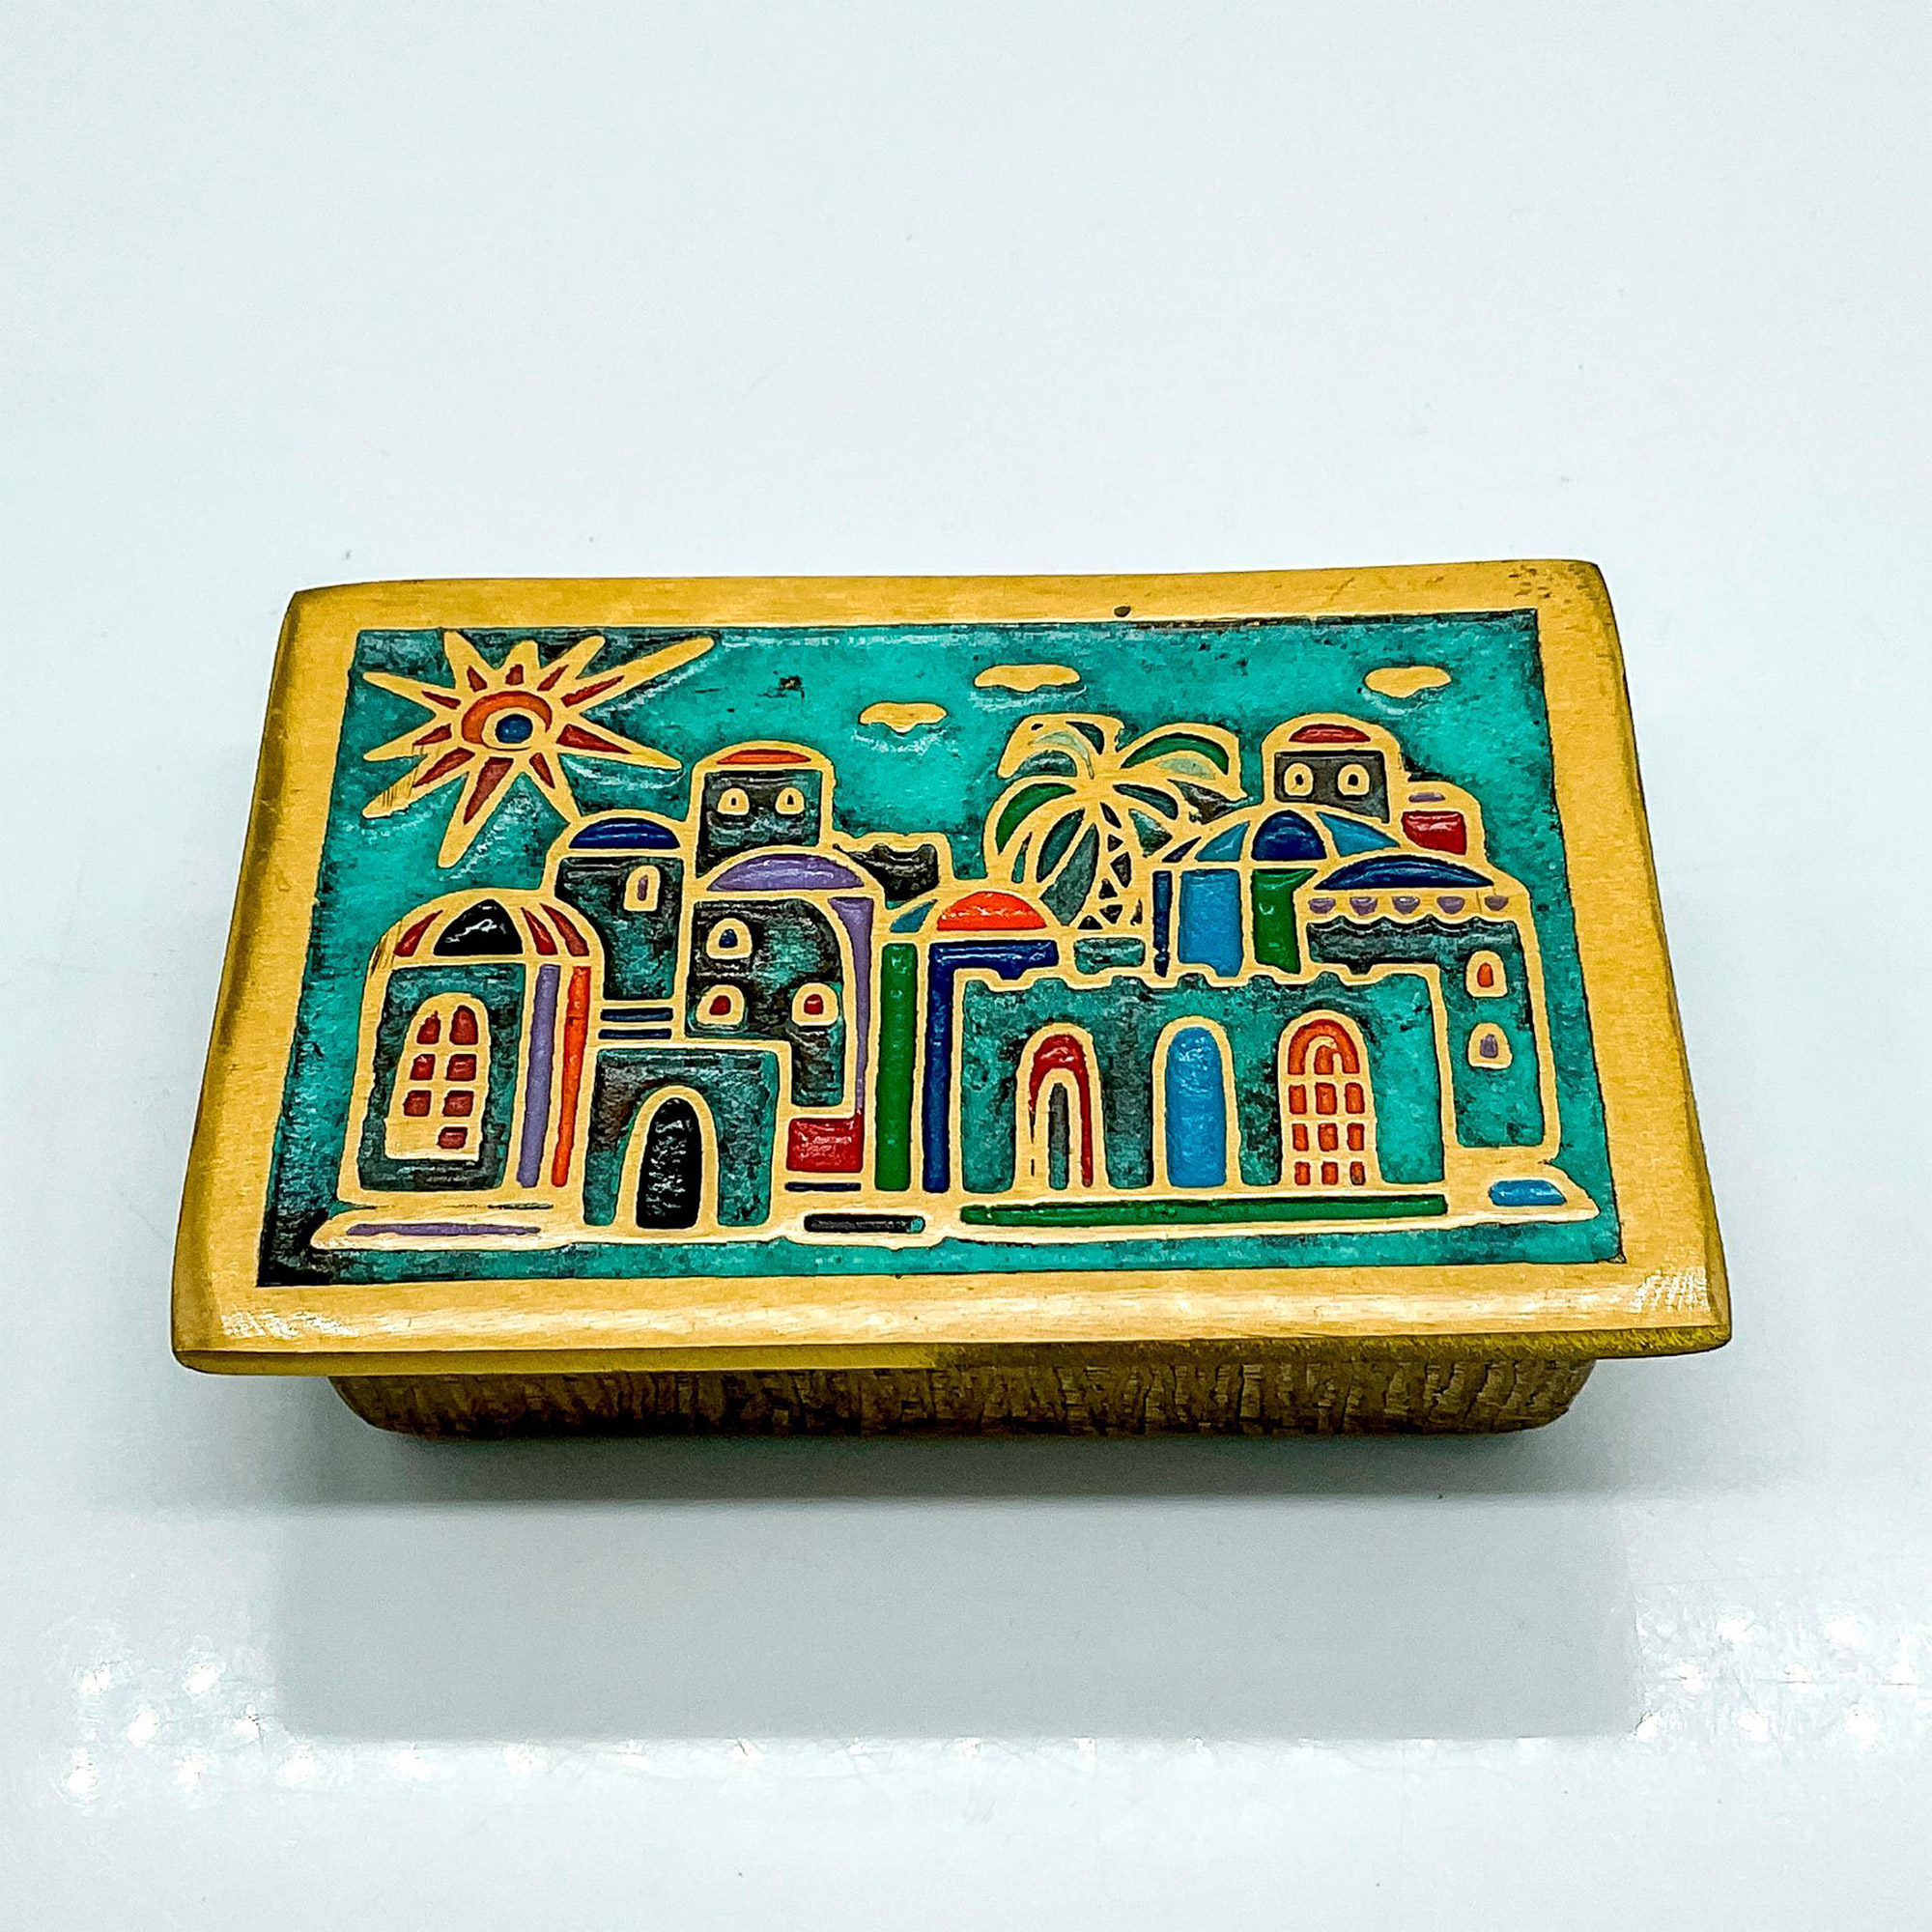 Vintage Brass Lidded Treasure Box, Cityscape and Sun - Image 2 of 4